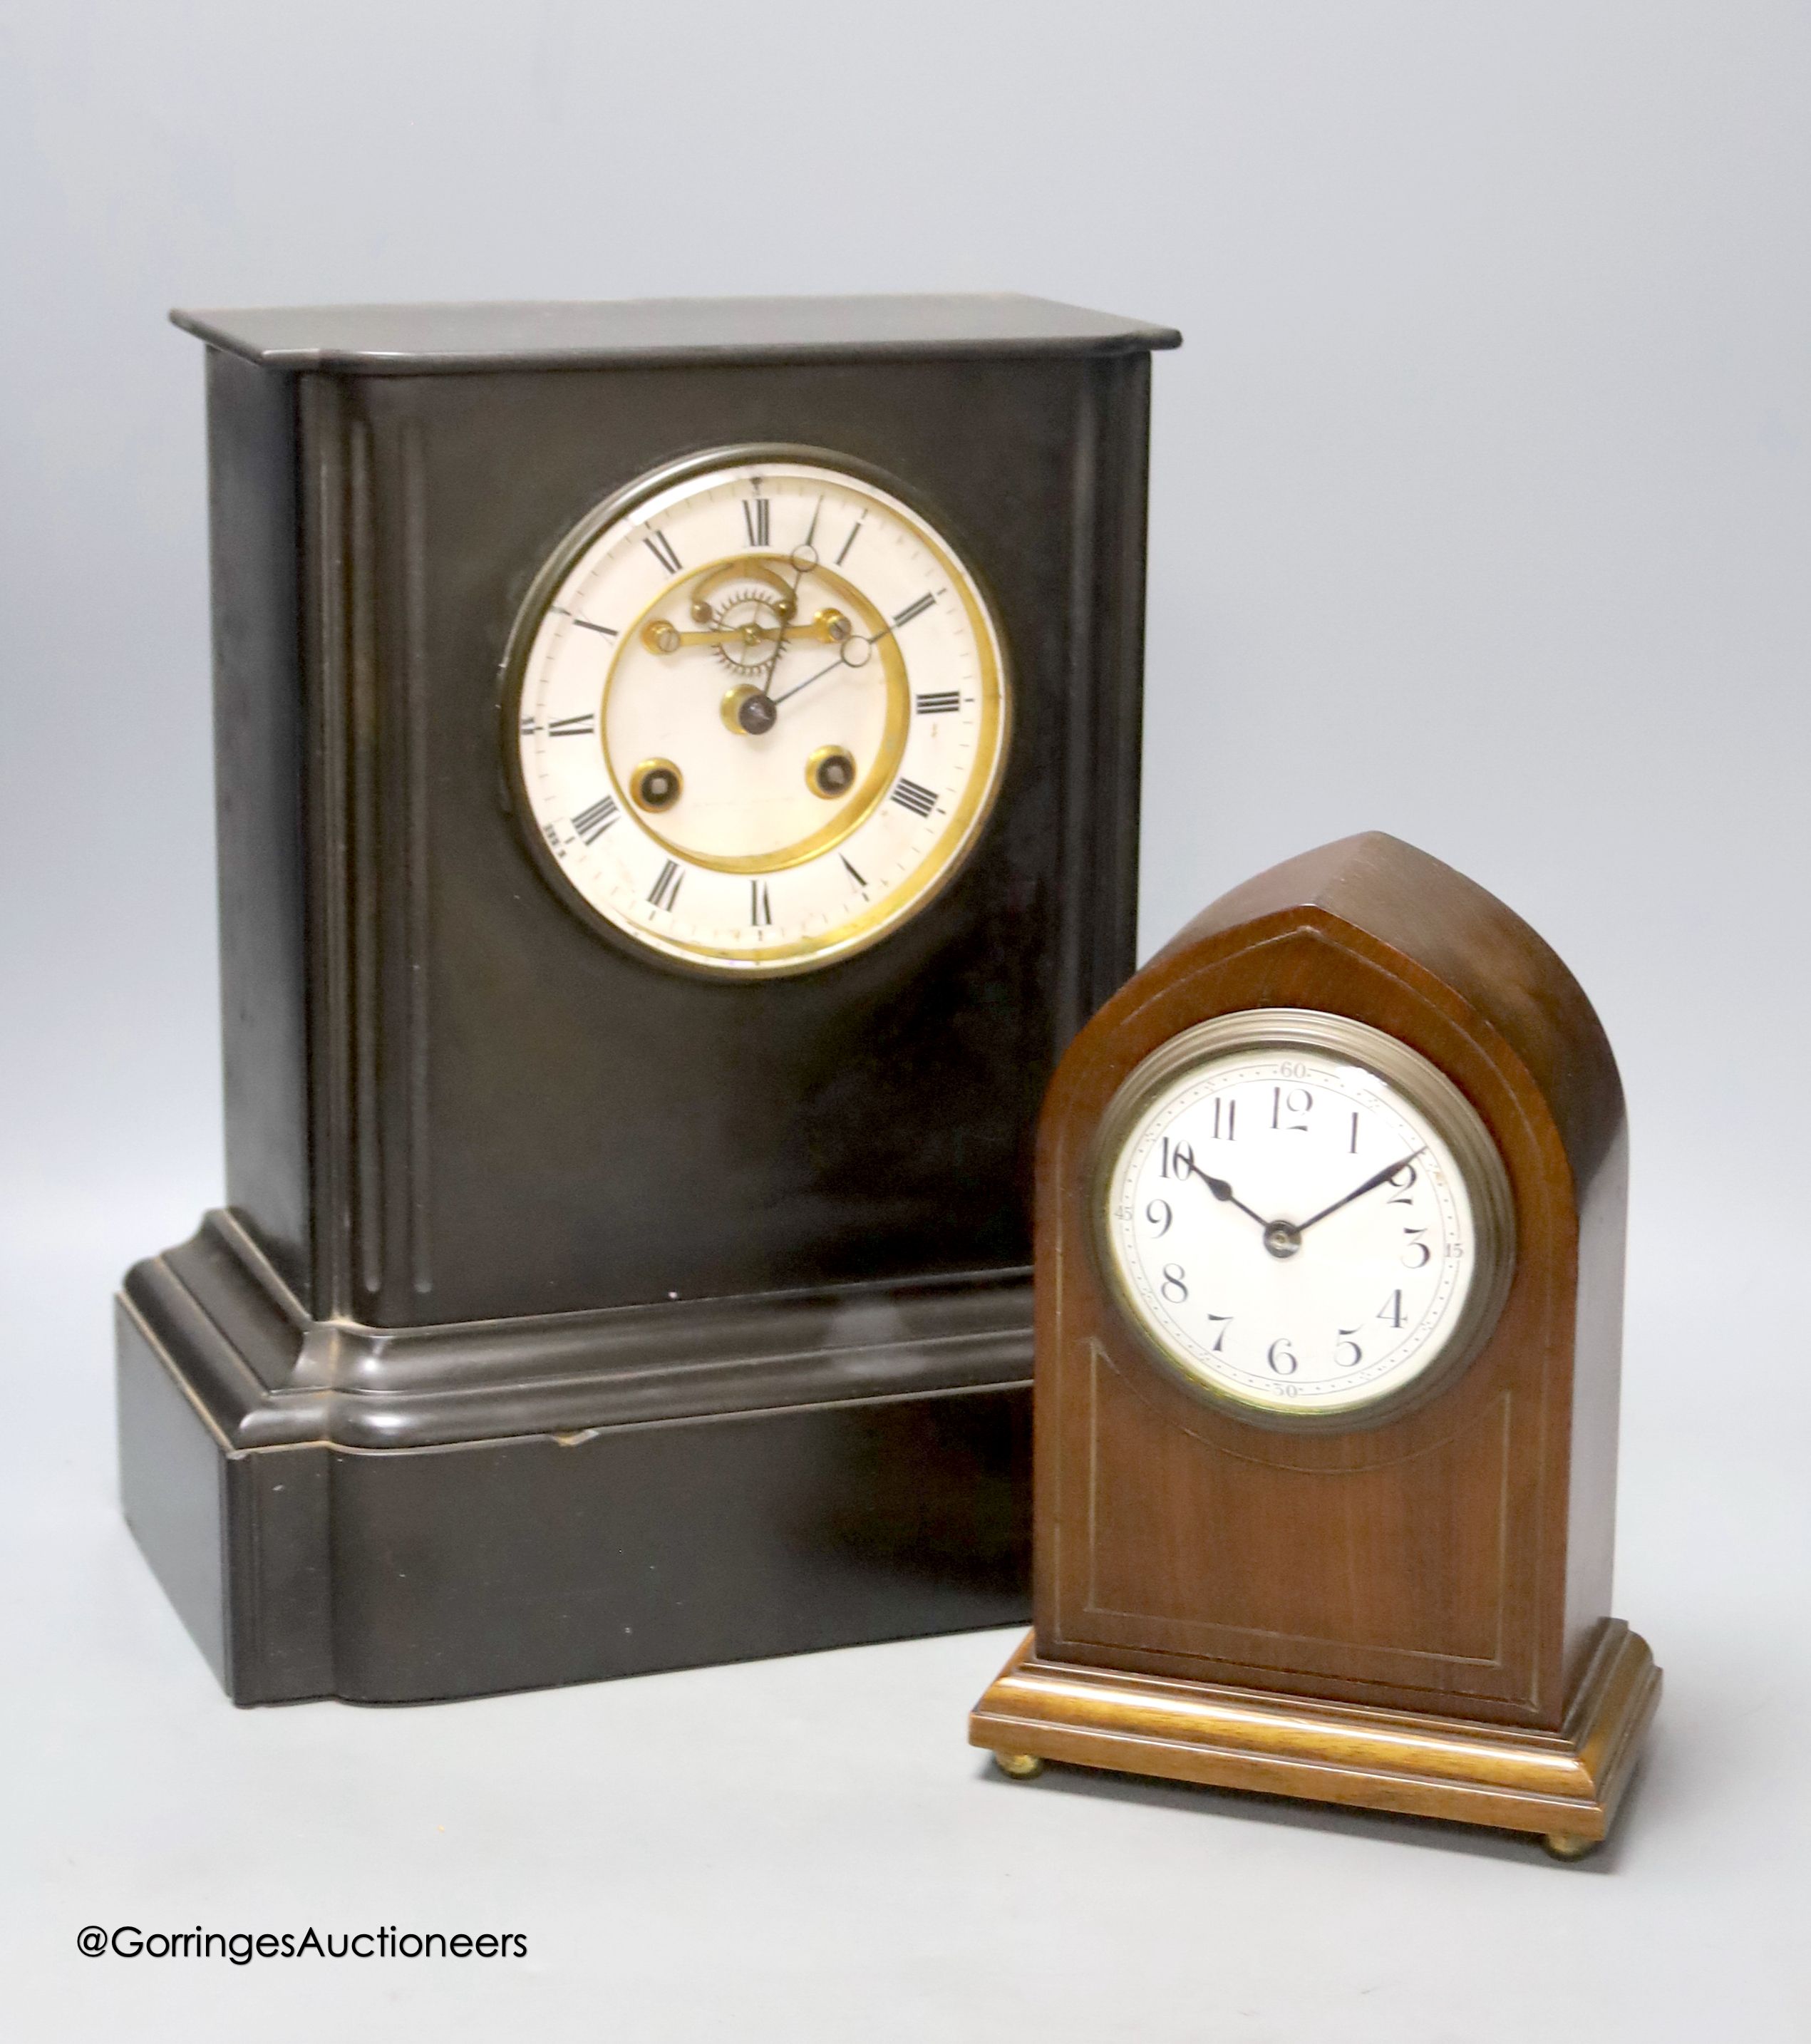 A black slate mantle clock with visible Brocot escapement, height 33cm, and an Edwardian mantel clock